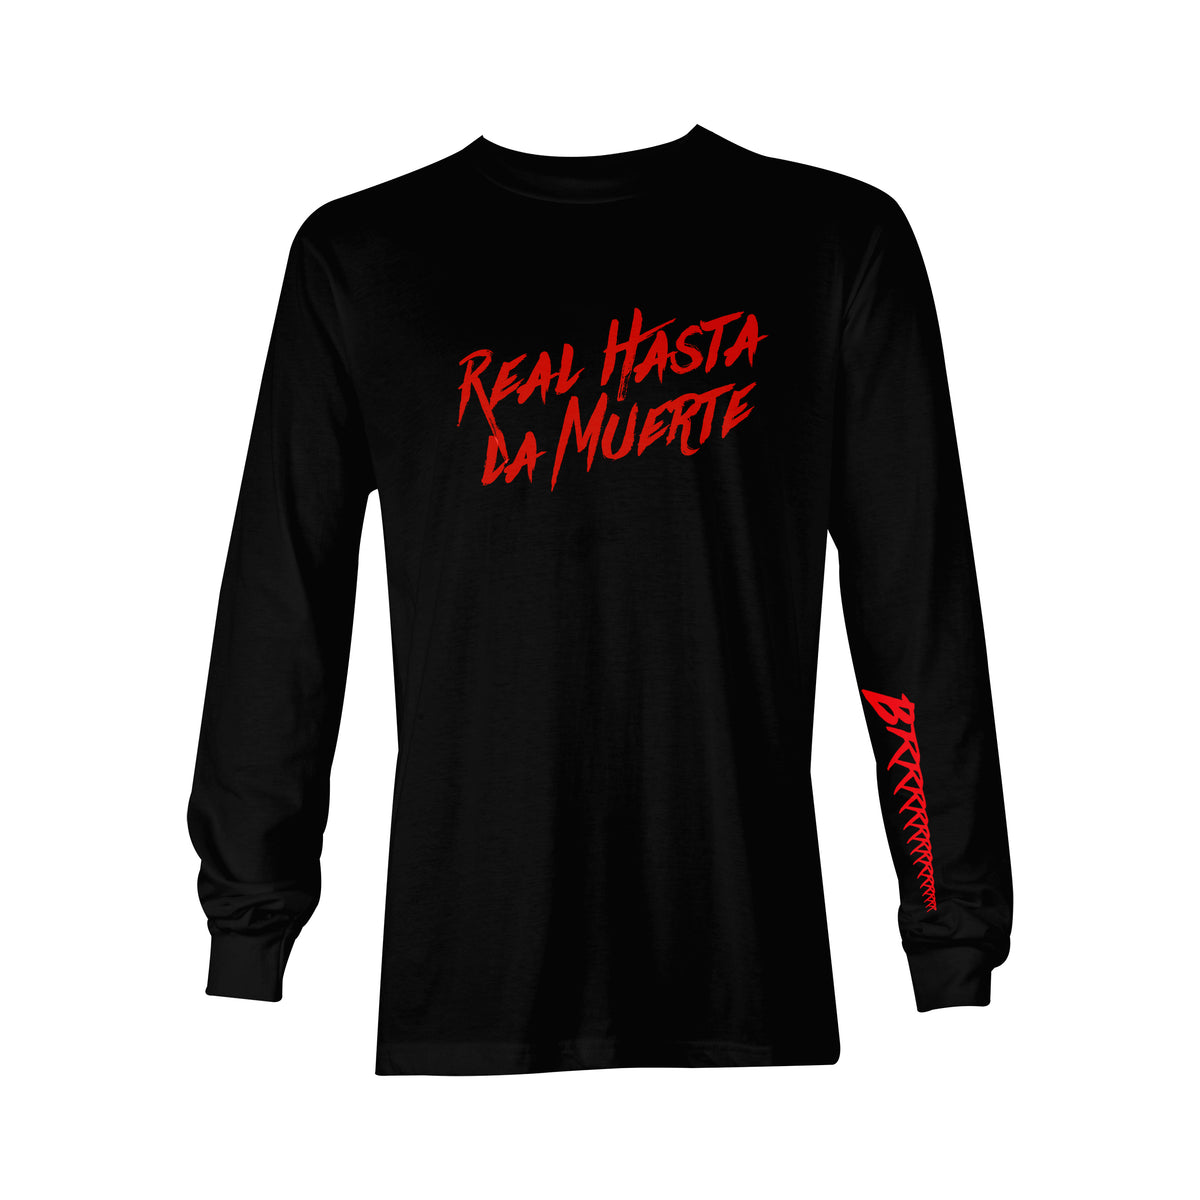 Anuel Aa T-Shirts for Sale